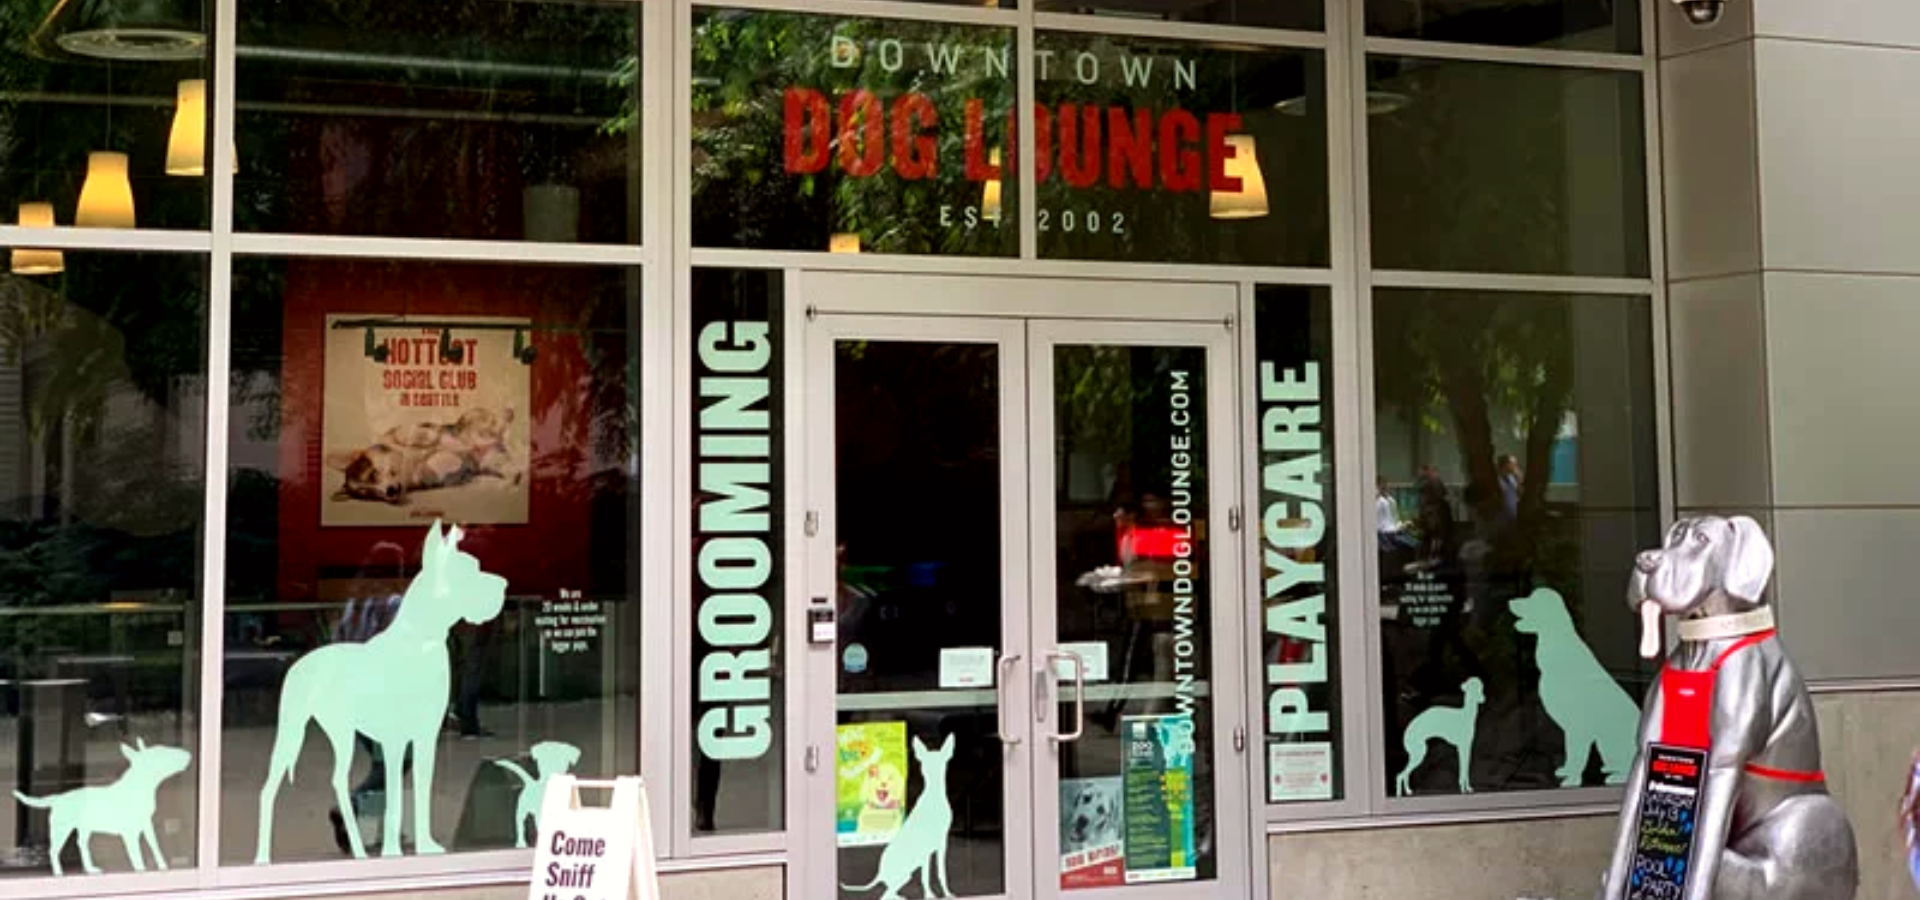 Exterior entrance to Downtown Dog Lounge.